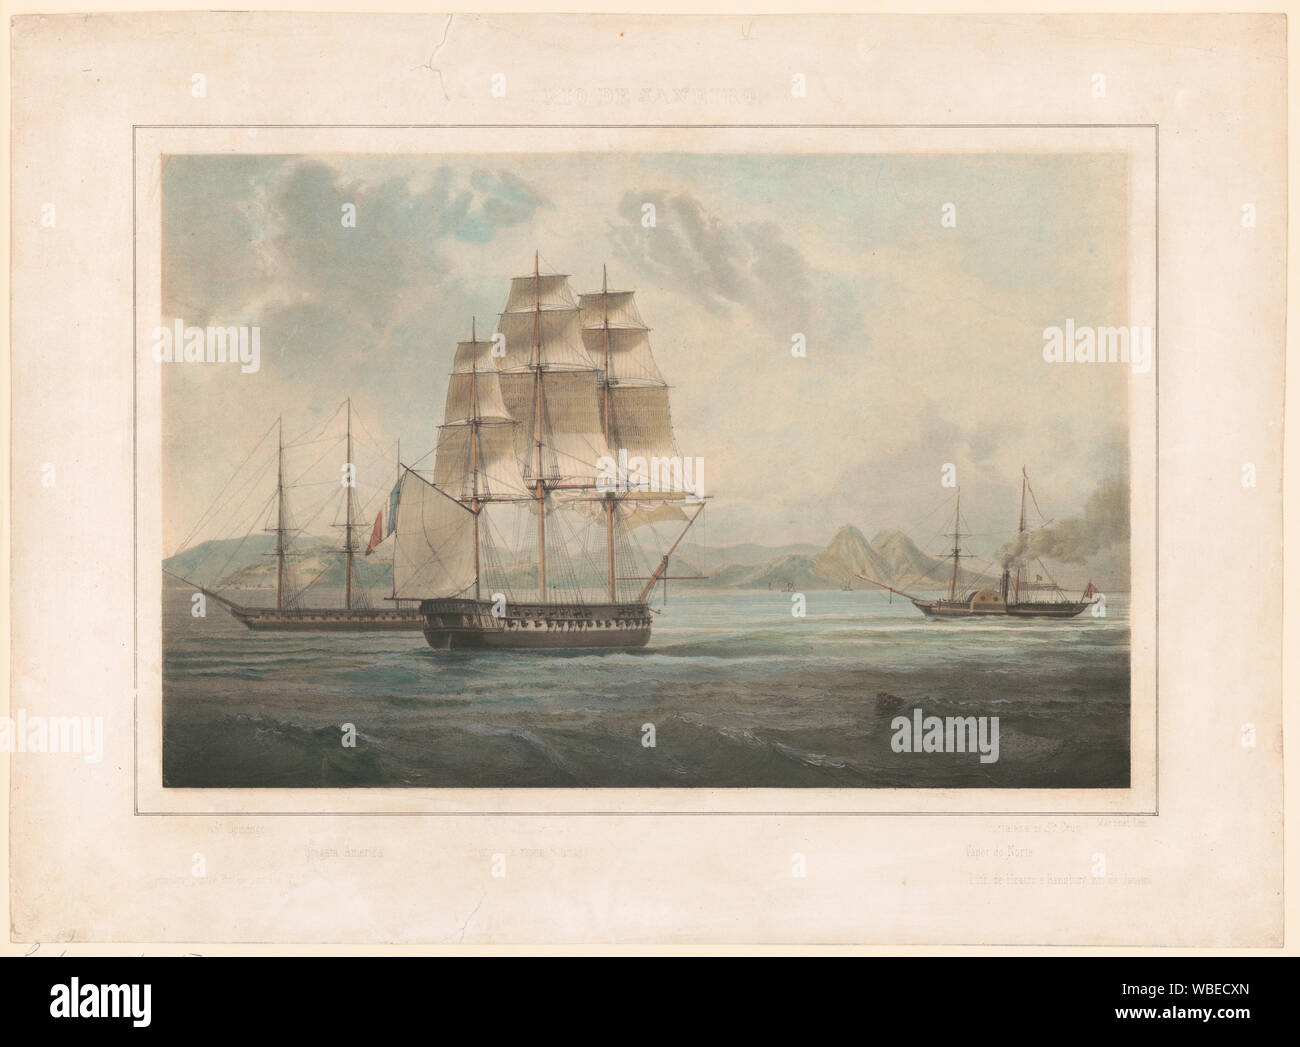 Frigate America & frigate La Rein Blanche. Text reads: St. Domingo, Fregata America, Fregate a Reine Blanche, Vapor do Norte, Fortaleza de Sta. Cruz, at Rio De Janeiro. Martinet Lith. (Alfred Martinet, 1821-1875). Lith. de Heatone e Rensburg, Rio de Janeiro. Some parts of text illegible. The image found here names the America frigate as the USS Constitution.  http://acervo.bndigital.bn.br/sophia/index.asp?codigo sophia=11107  The USS Constitution arrived at Rio 2 August 1844 and sailed out on 8 Sept 1844; she next arrived on 28 July 1846 and sailed out 5 August 1866. See http://bowerbird-media Stock Photo